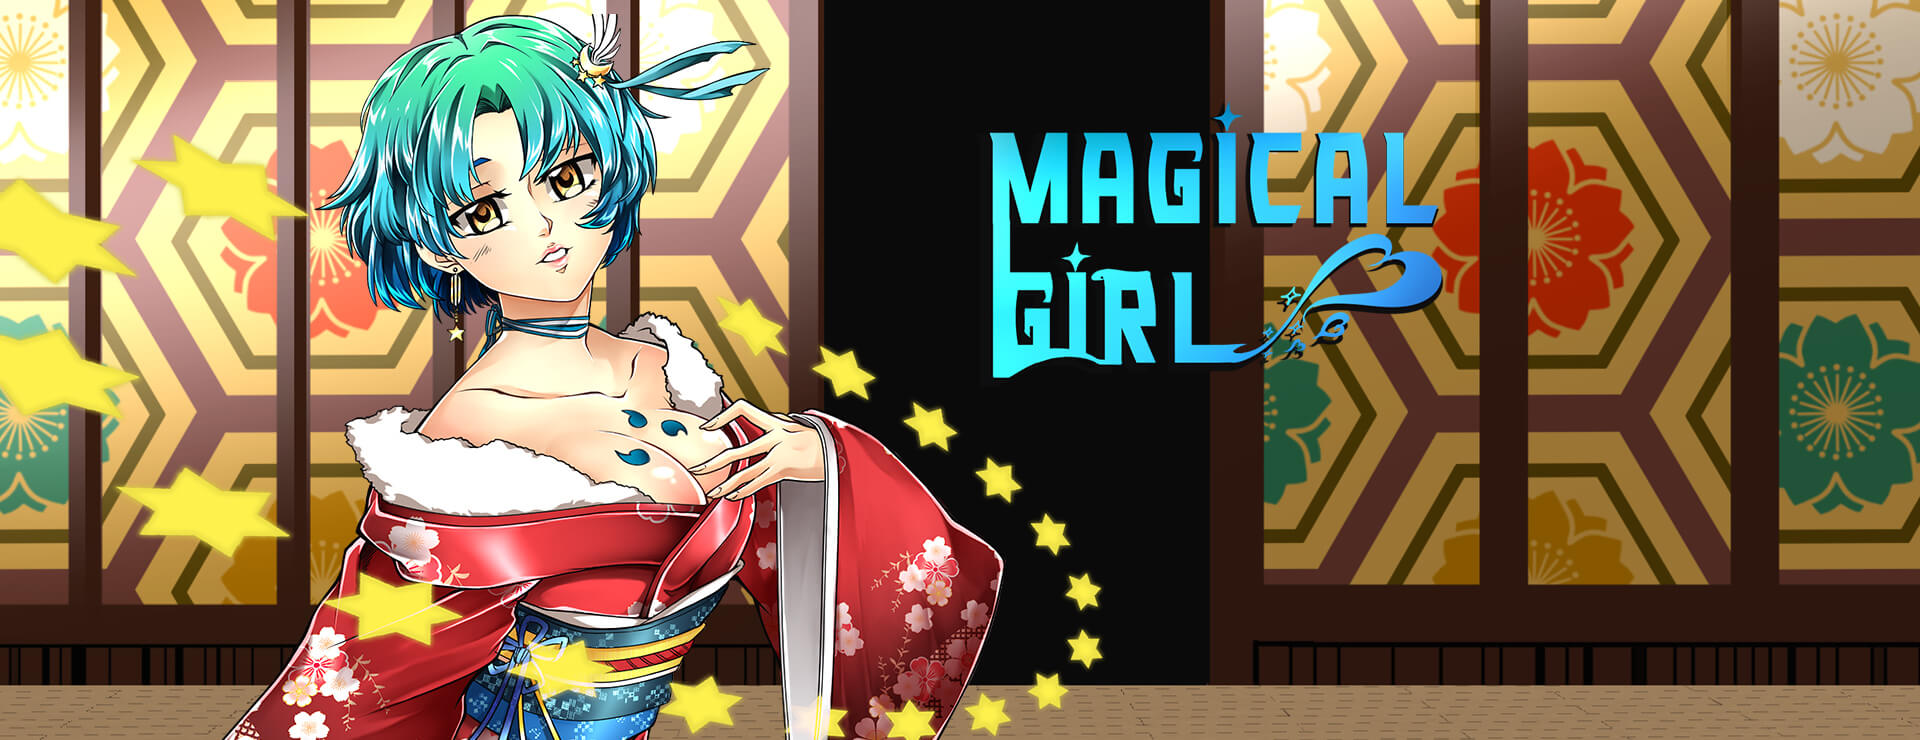 Magical Girl - Casual Game